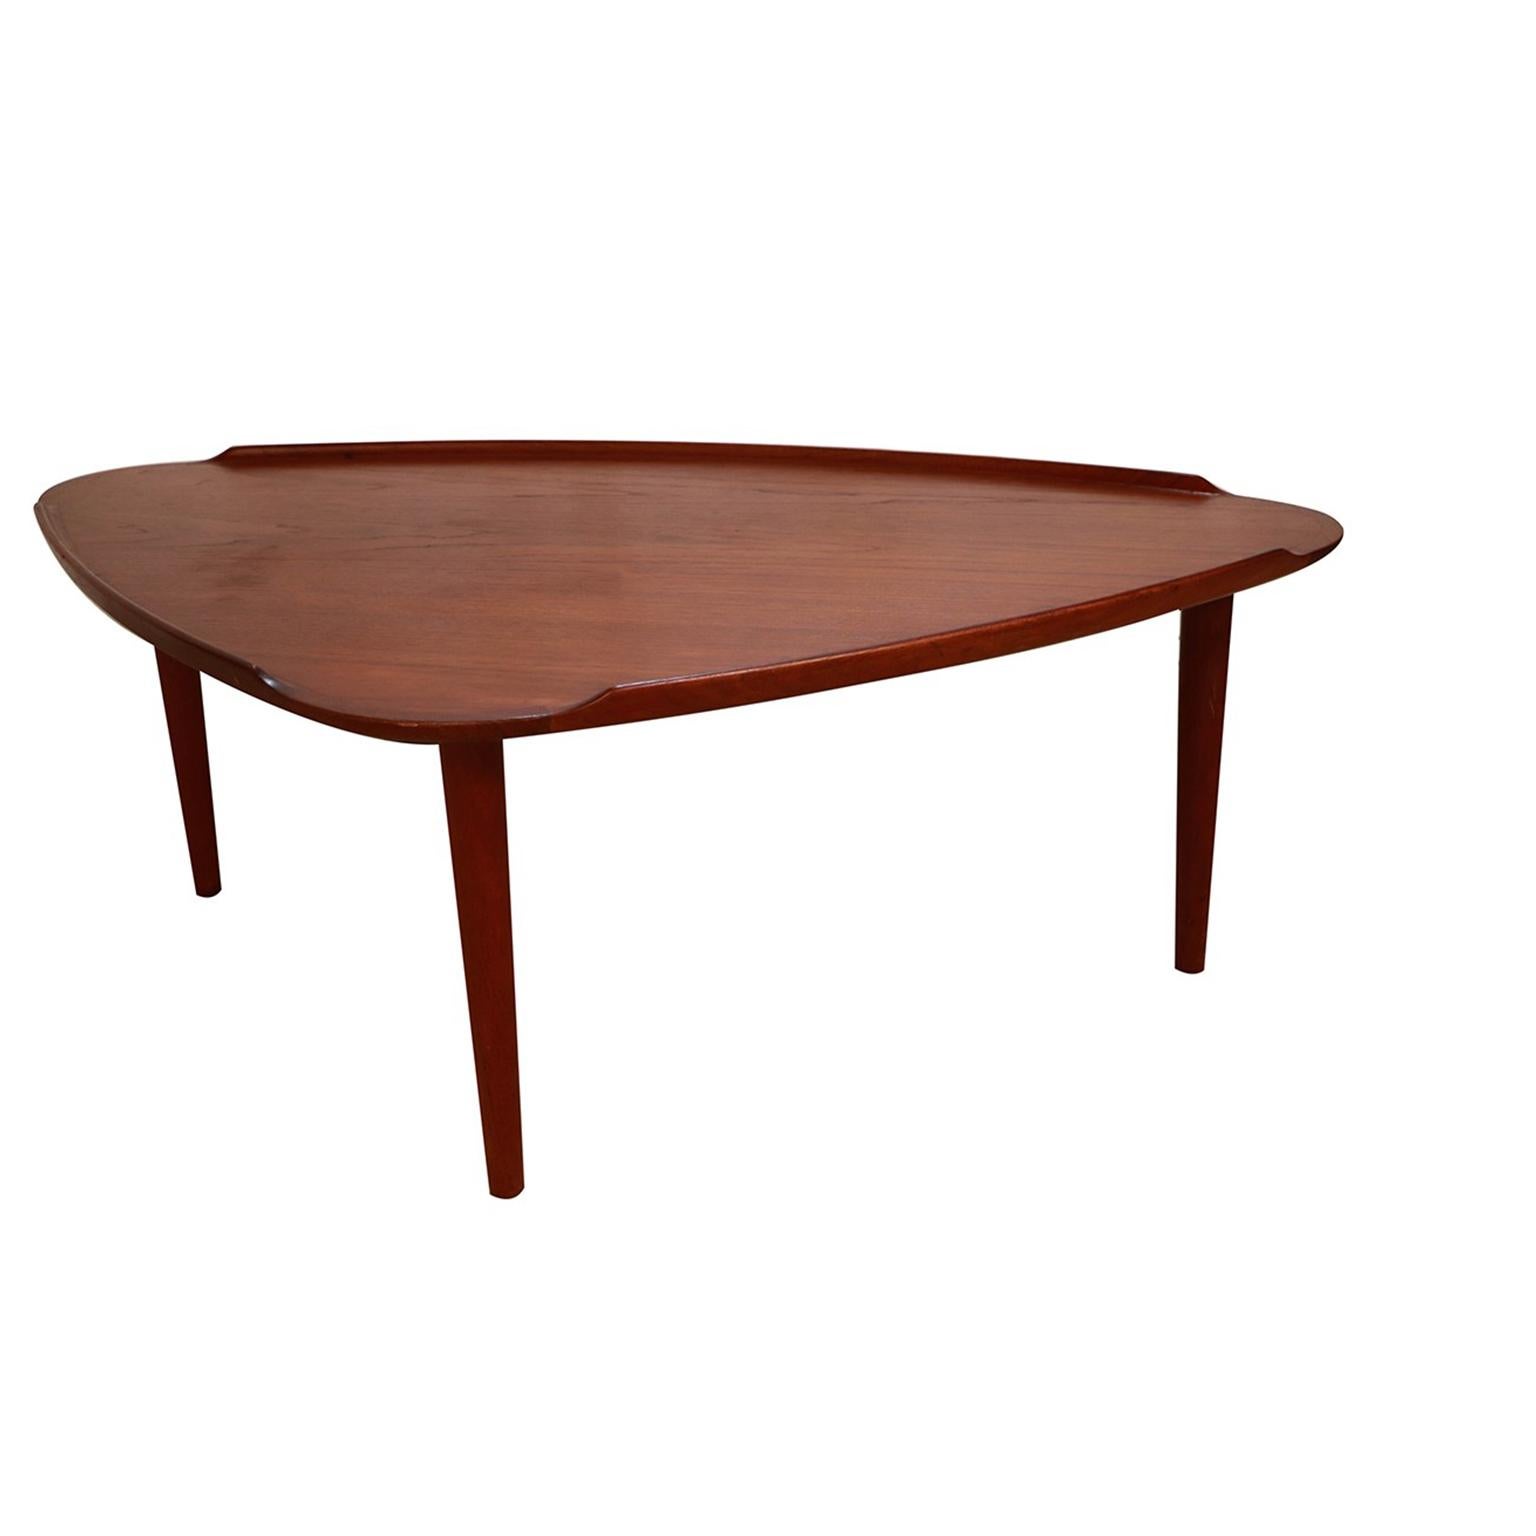 Spectacular 1960s Danish modern teak tripod triangular coffee table designed by Aakjaer Jorgensen for Mobelintarsia, Denmark, circa early 1960s. Features a triangular “guitar pick” shaped top in beautifully grained teak with carved lip edges